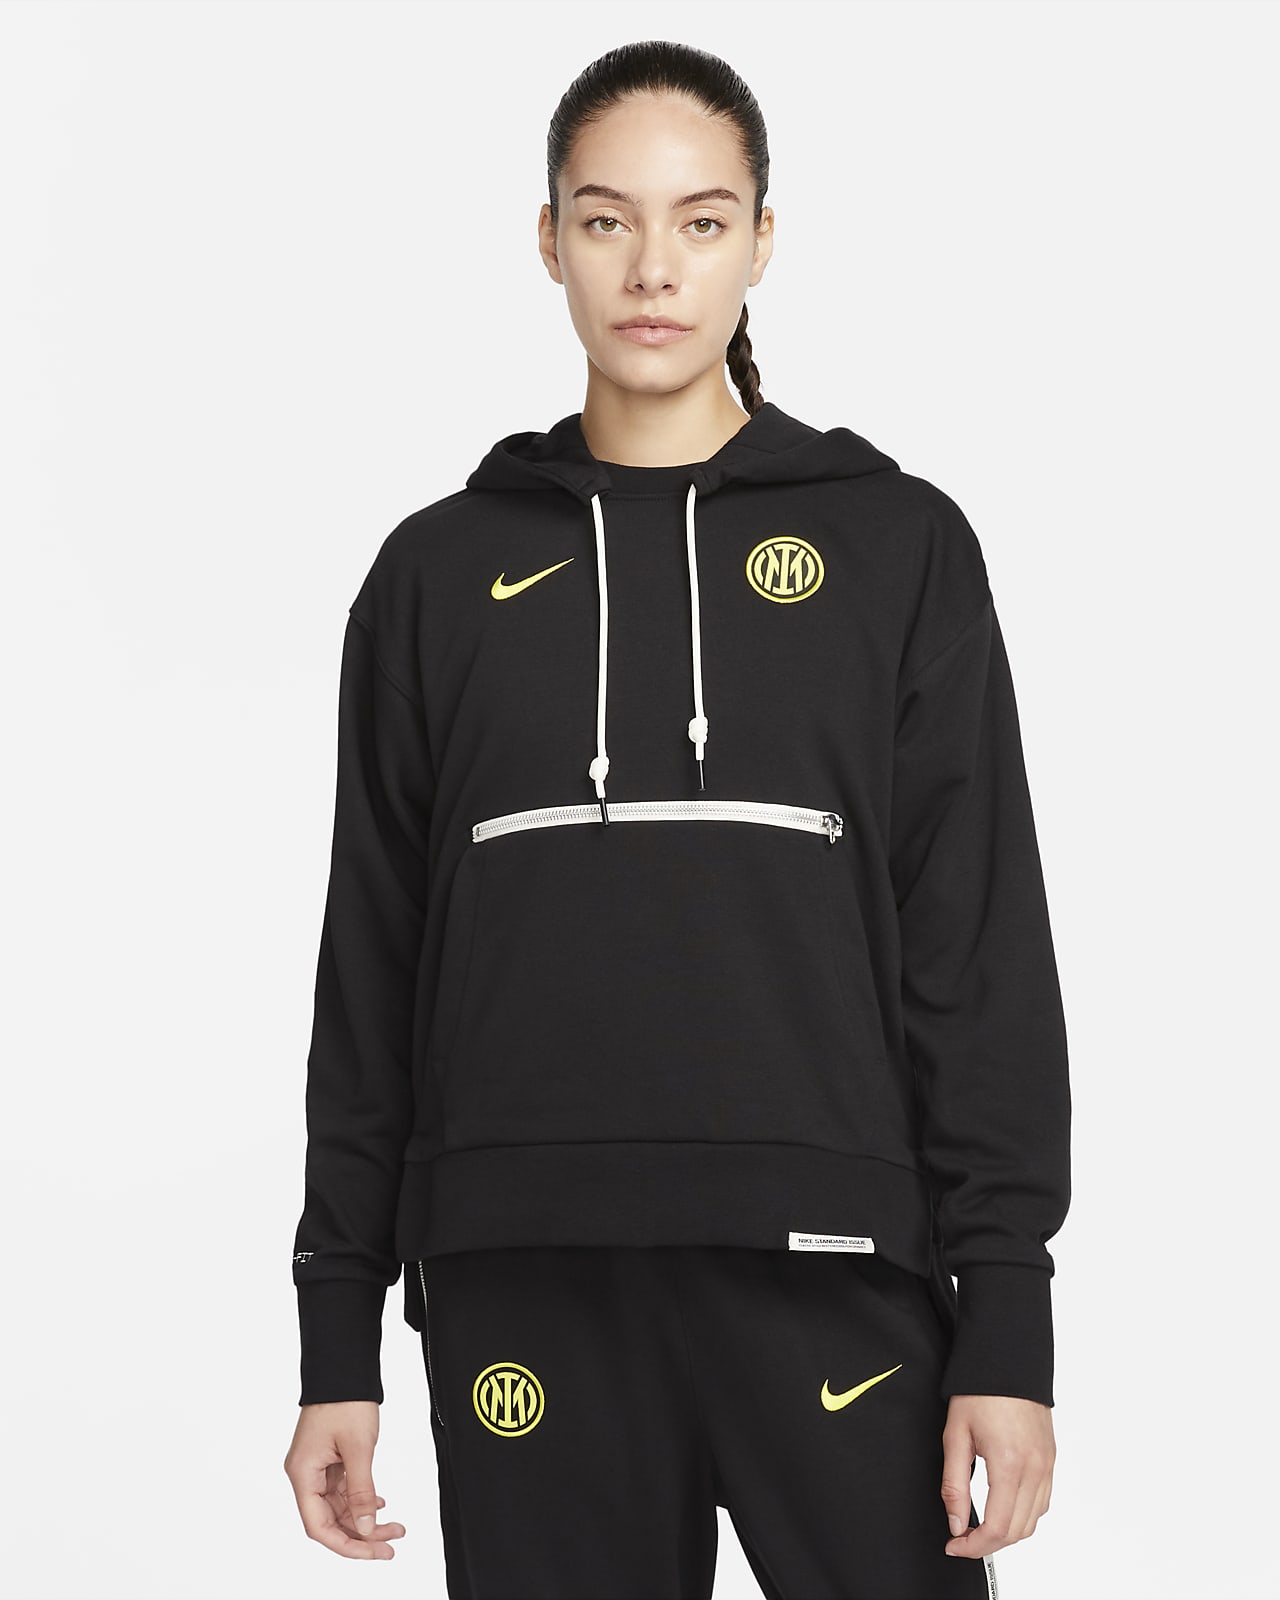 https://static.nike.com/a/images/t_PDP_1280_v1/f_auto,q_auto:eco/185607a4-e8fb-41c5-b1f3-5f6b217ec5e0/sweat-a-capuche-dri-fit-inter-milan-standard-issue-pour-JT8kQB.png